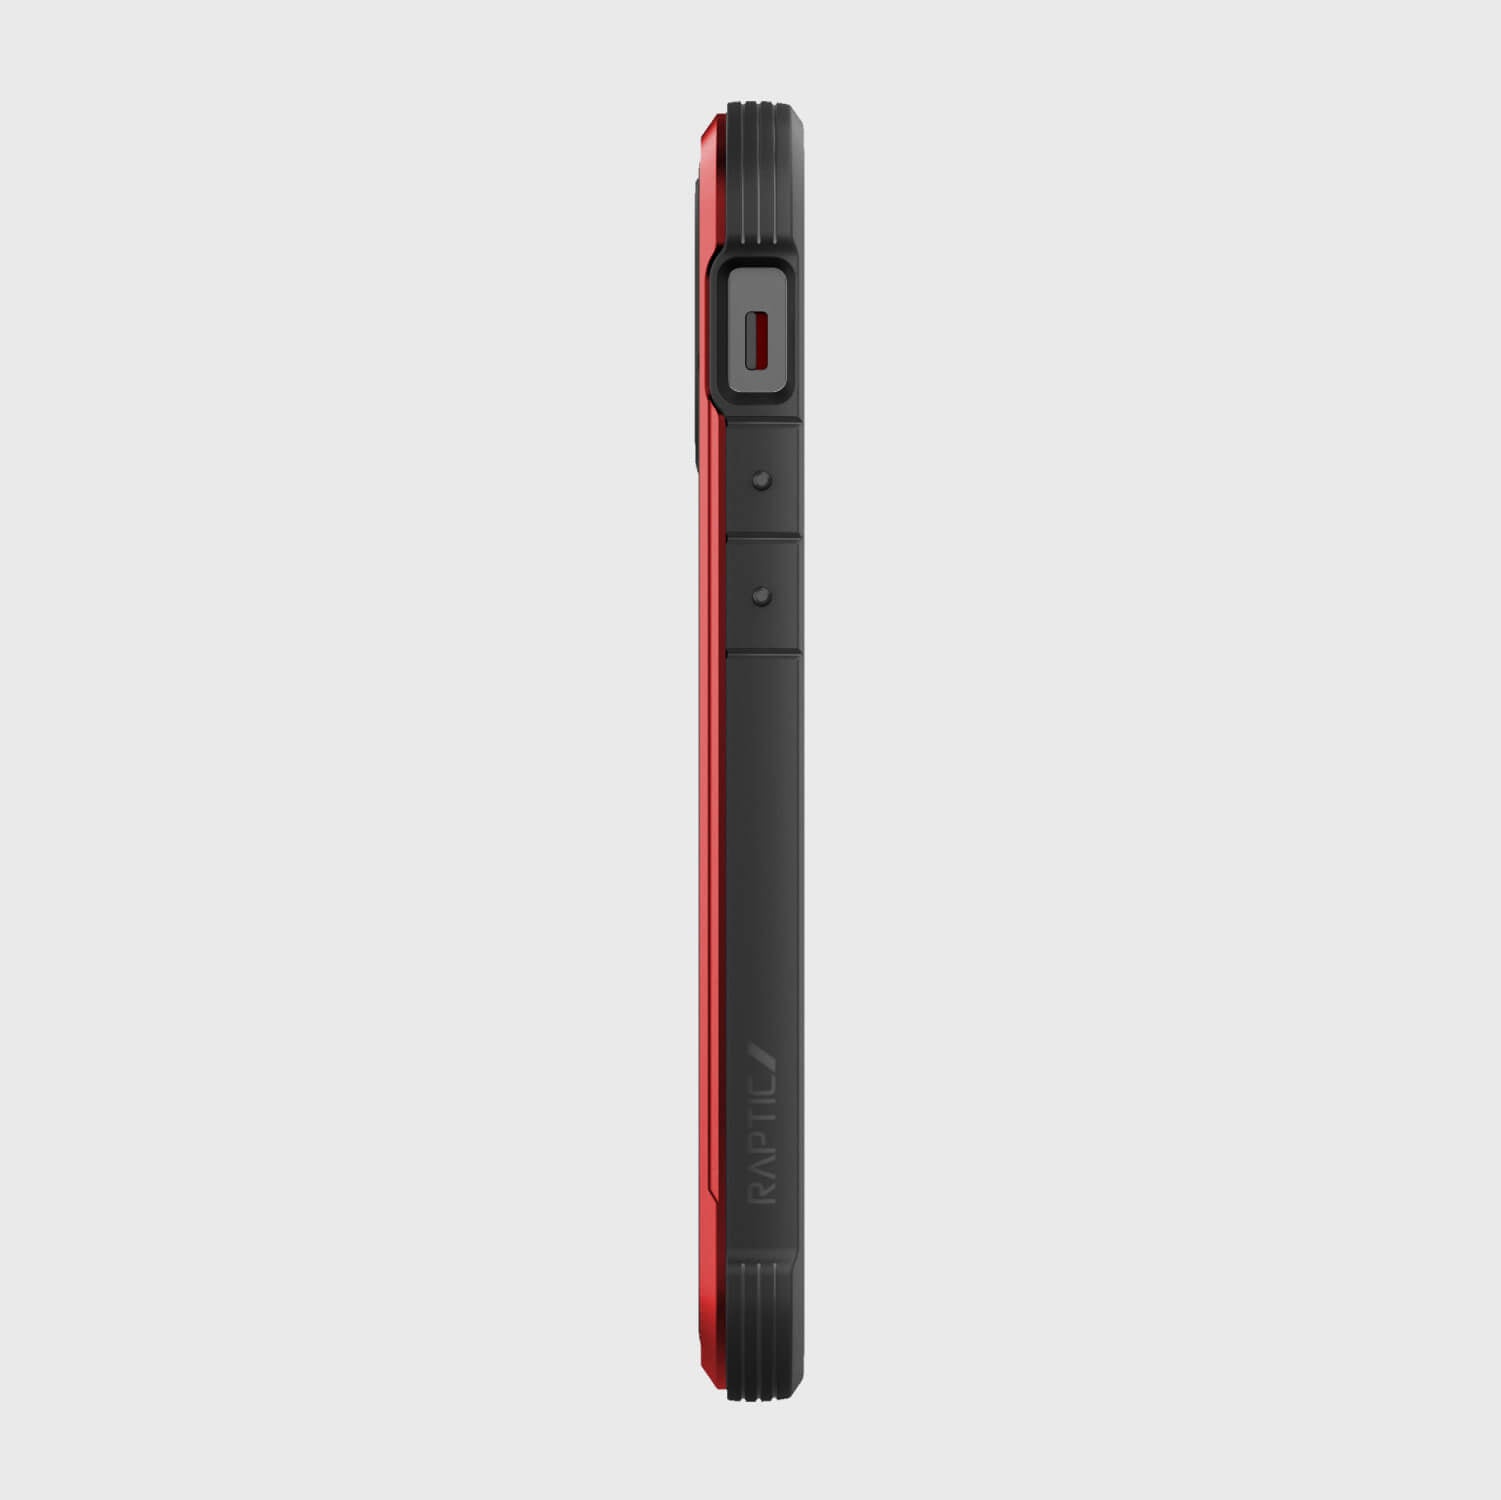 A red and black iPhone 13 Mini Case - SHIELD PRO by Raptic on a white background.